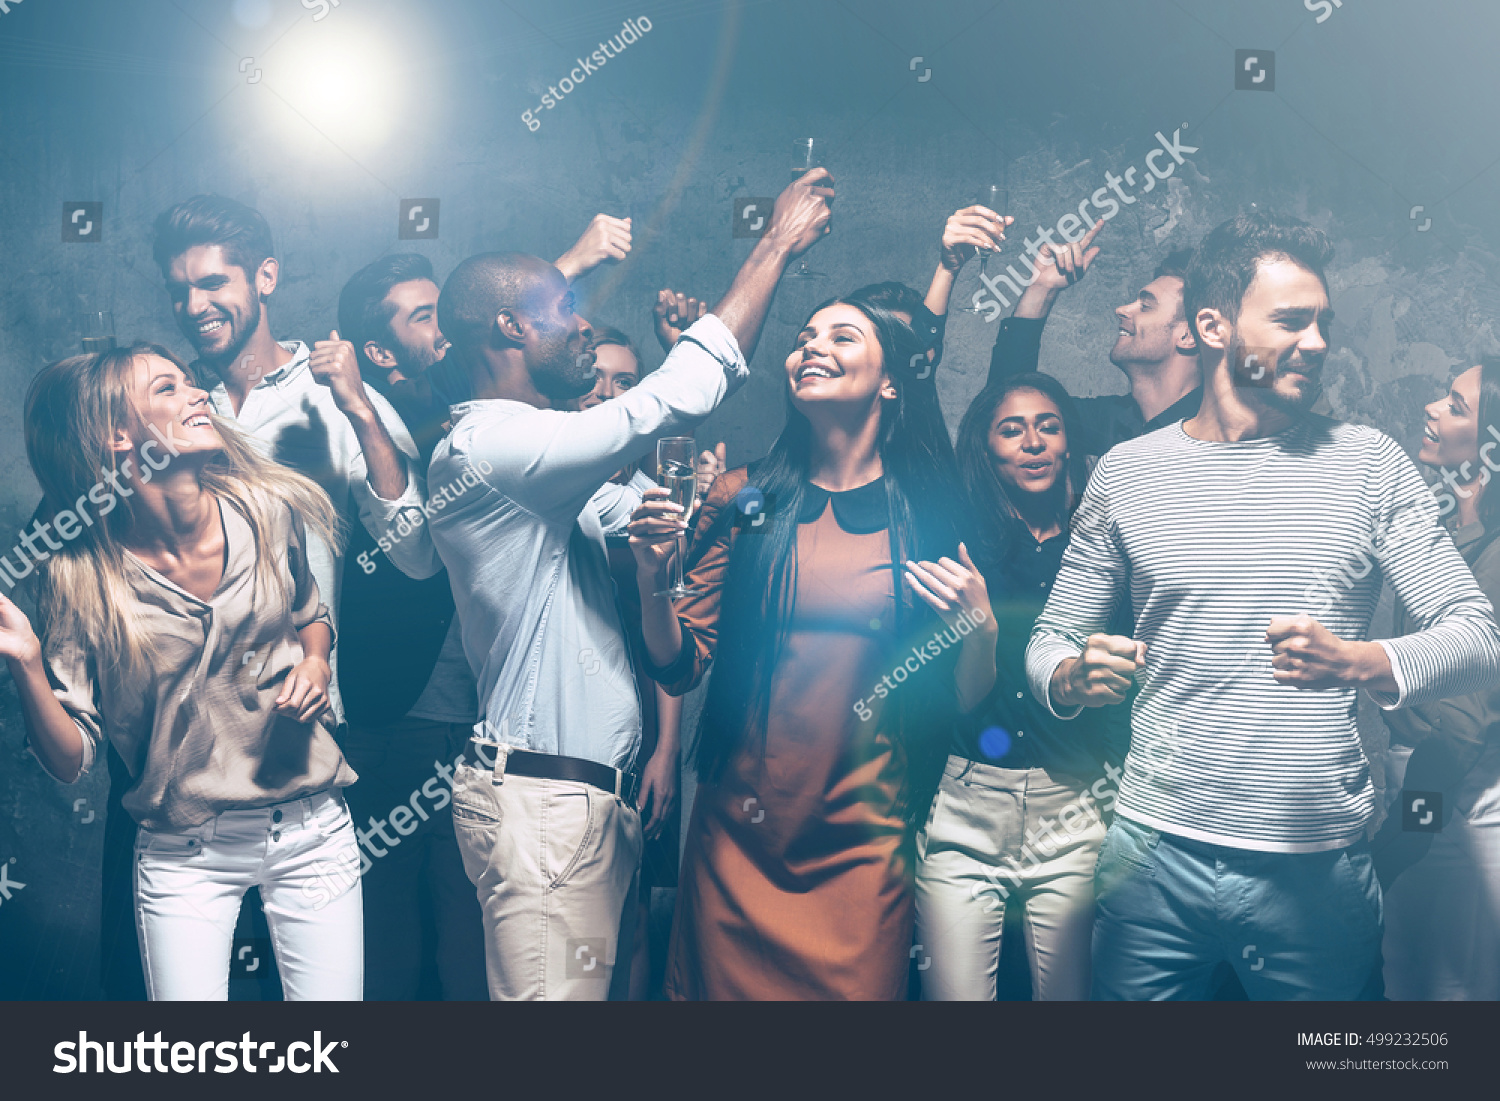 Unstoppable party. Group of beautiful young people dancing together and looking happy #499232506